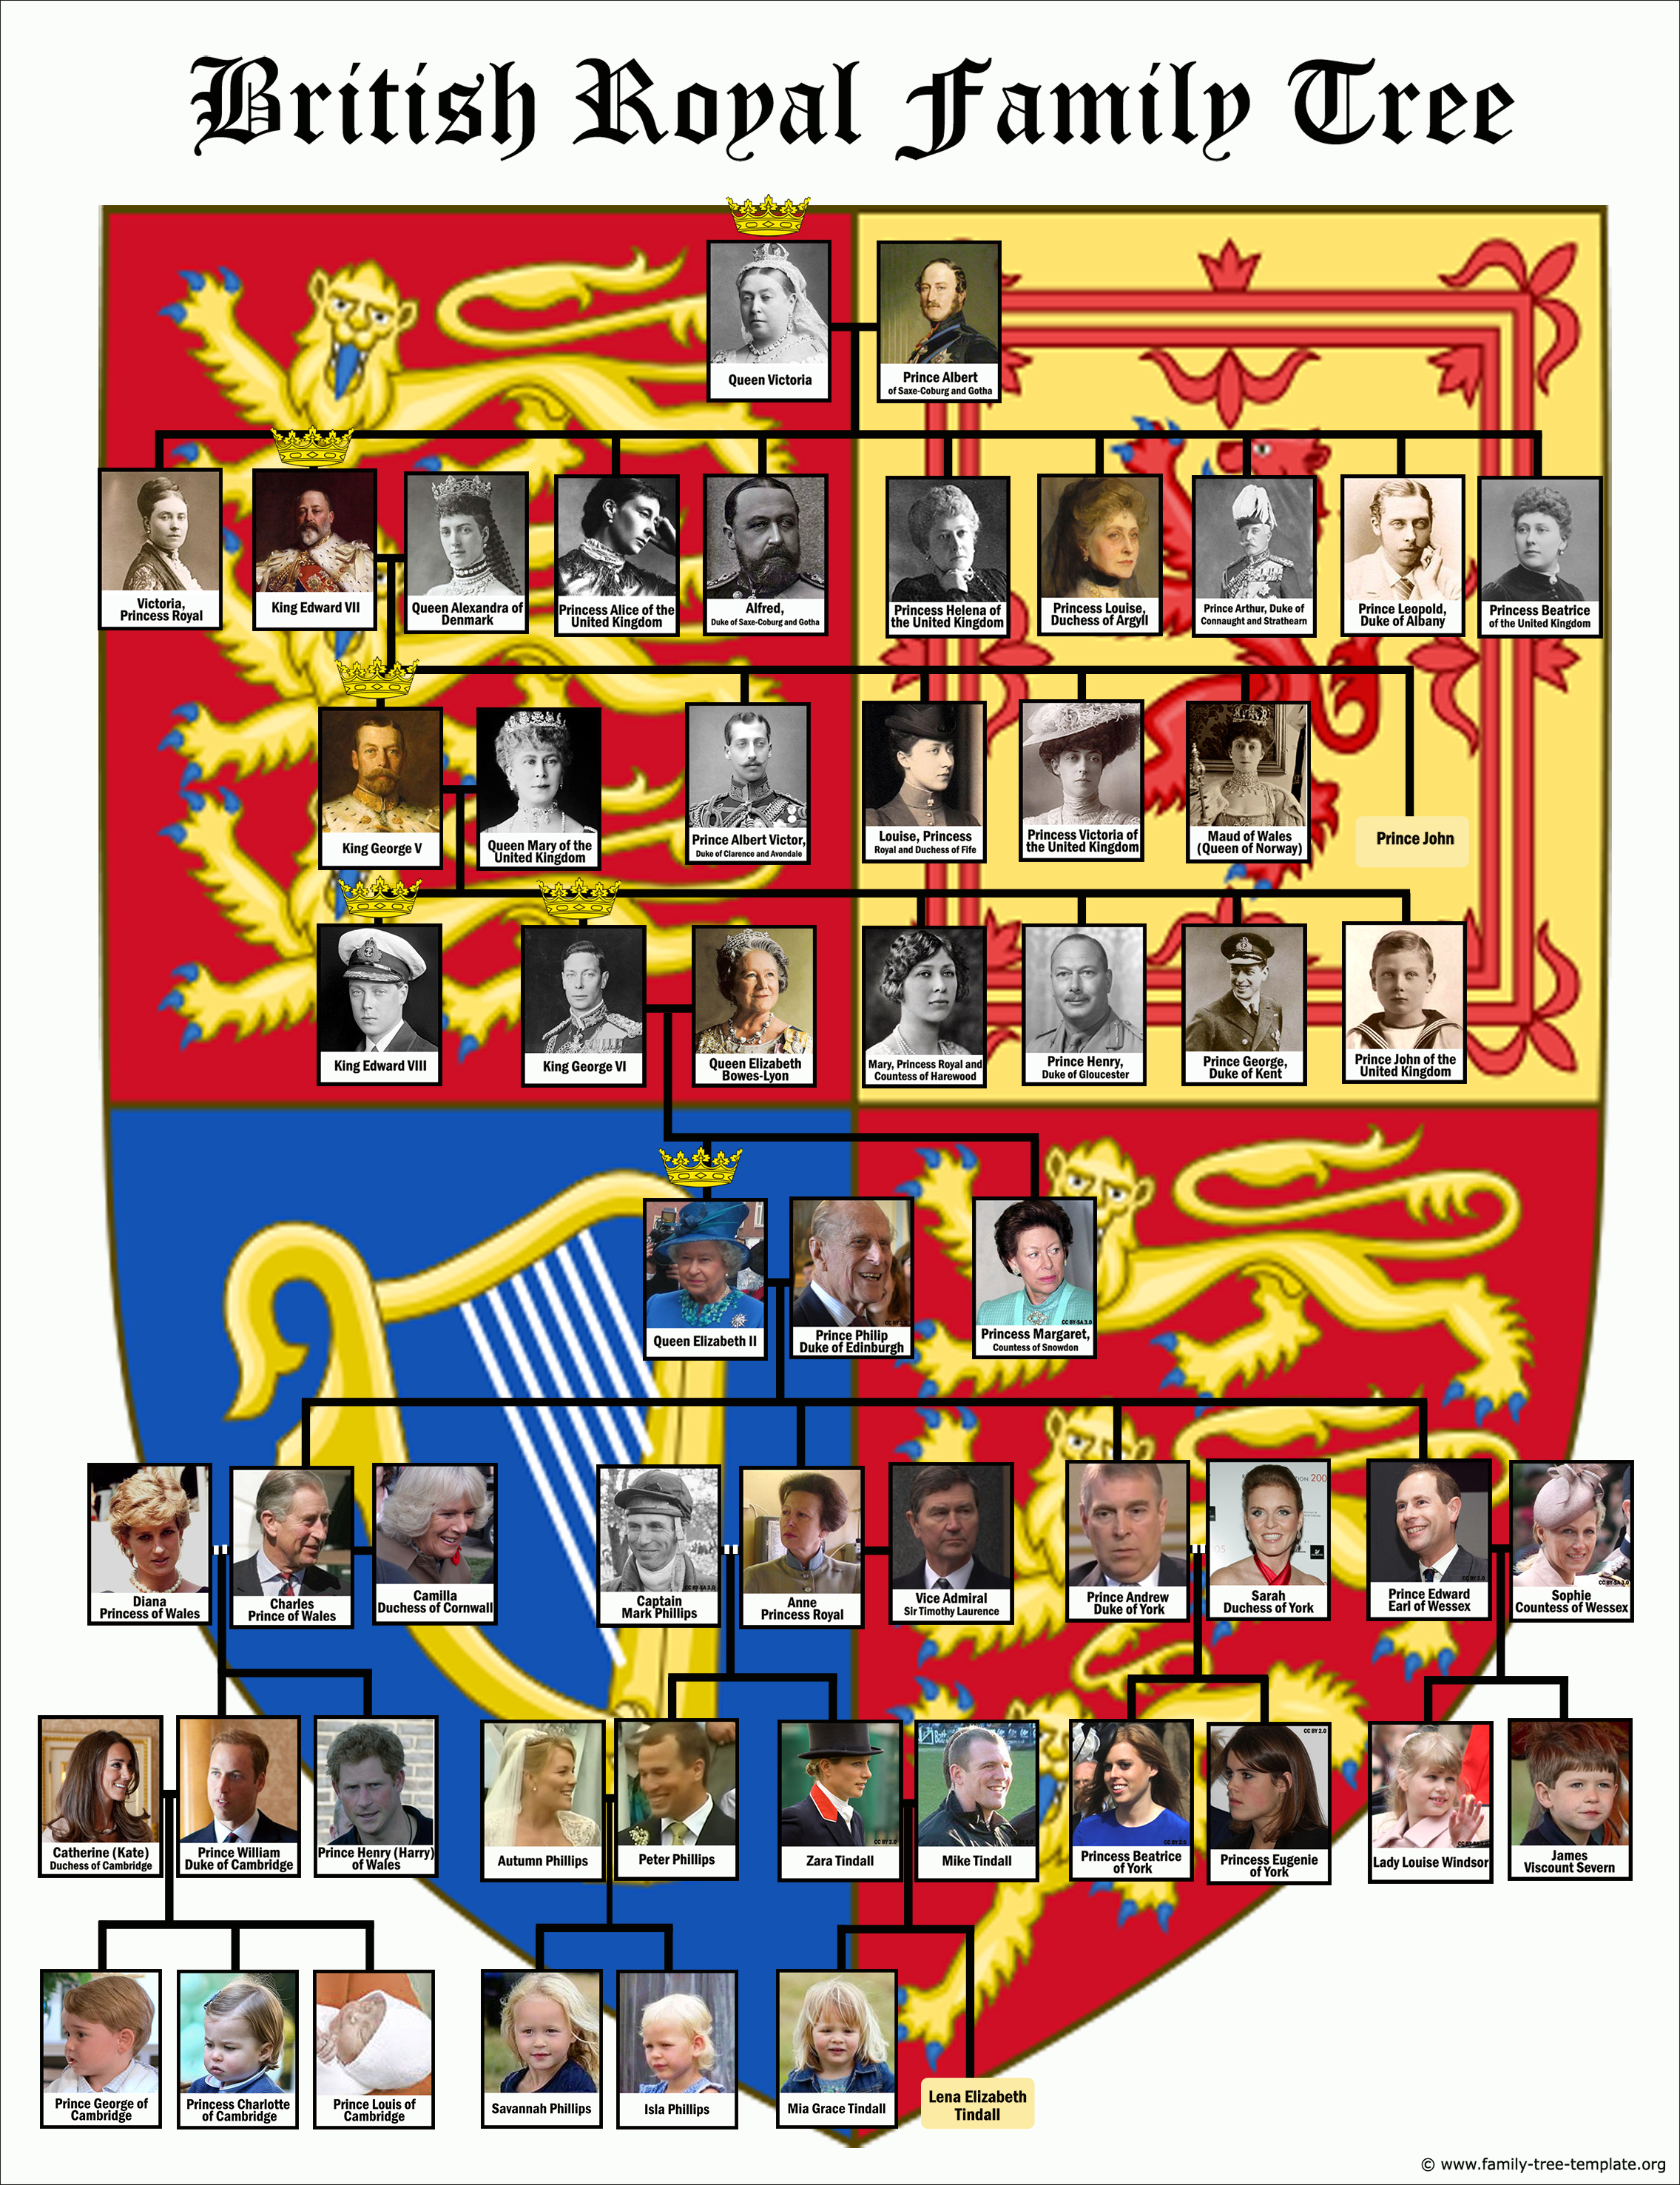 Decorative British royal family tree chart with 8 generations of kings and queens.